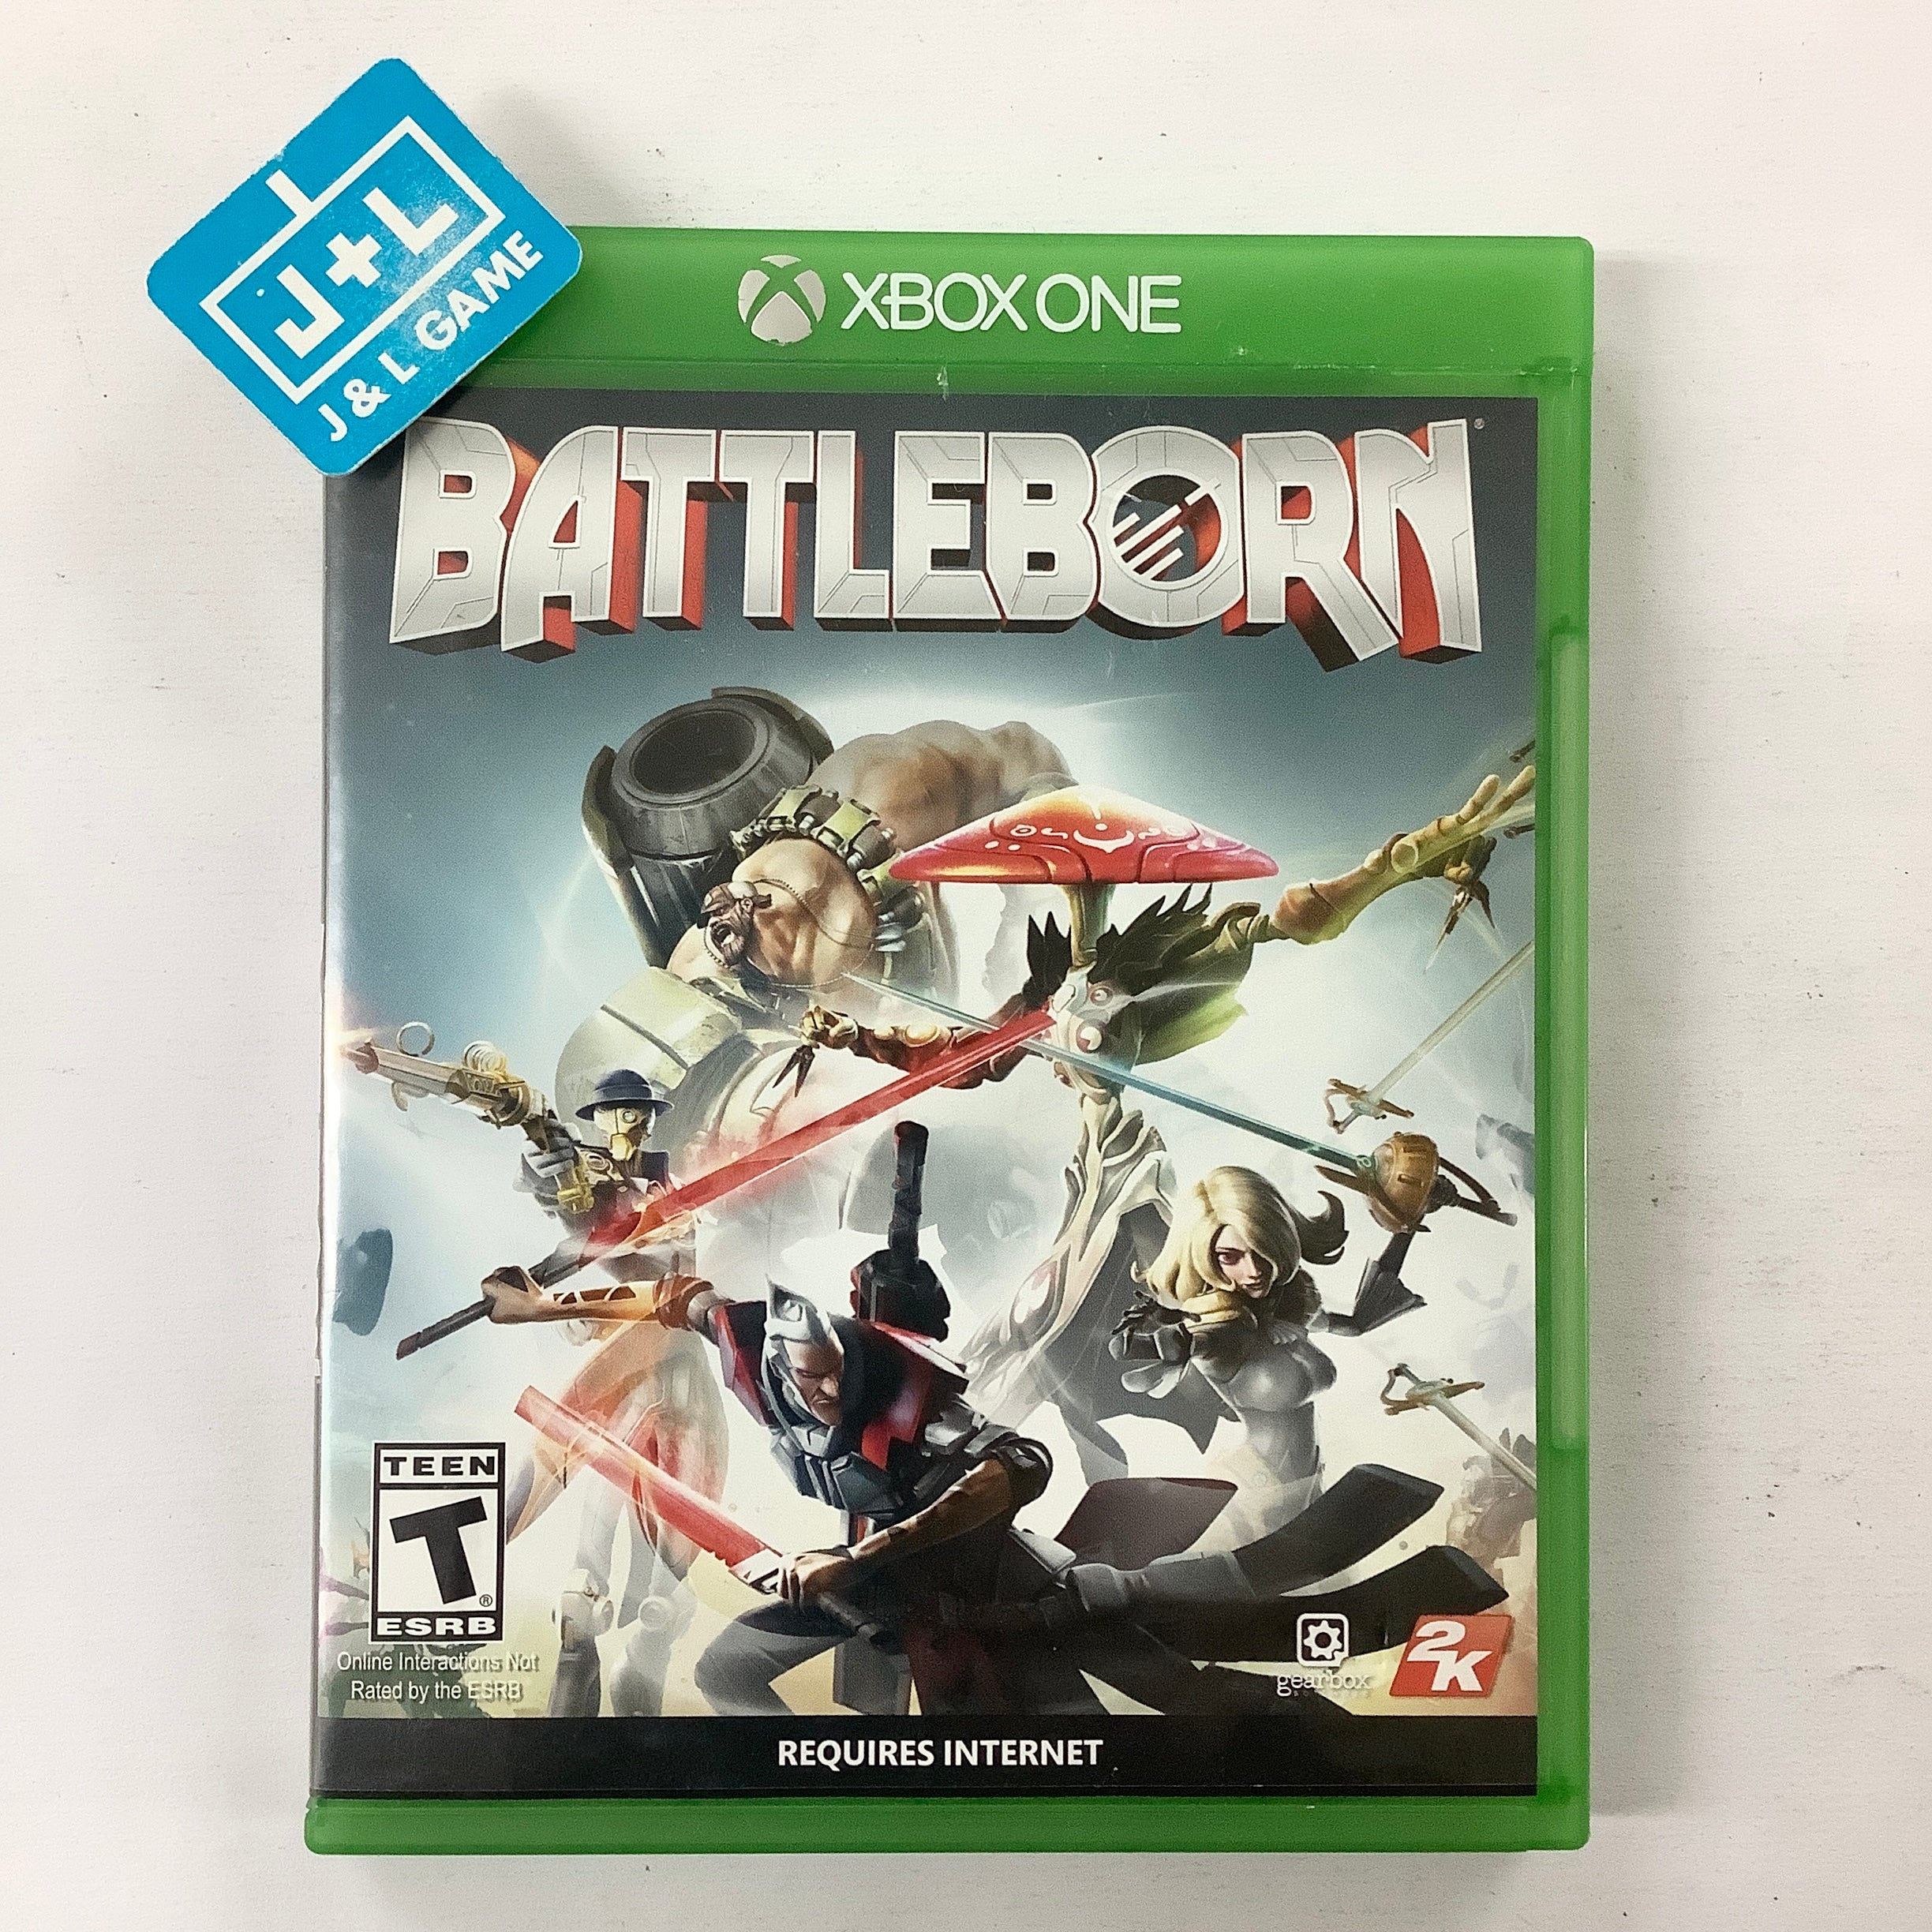 Battleborn - (XB1) Xbox One [Pre-Owned] Video Games 2K Games   